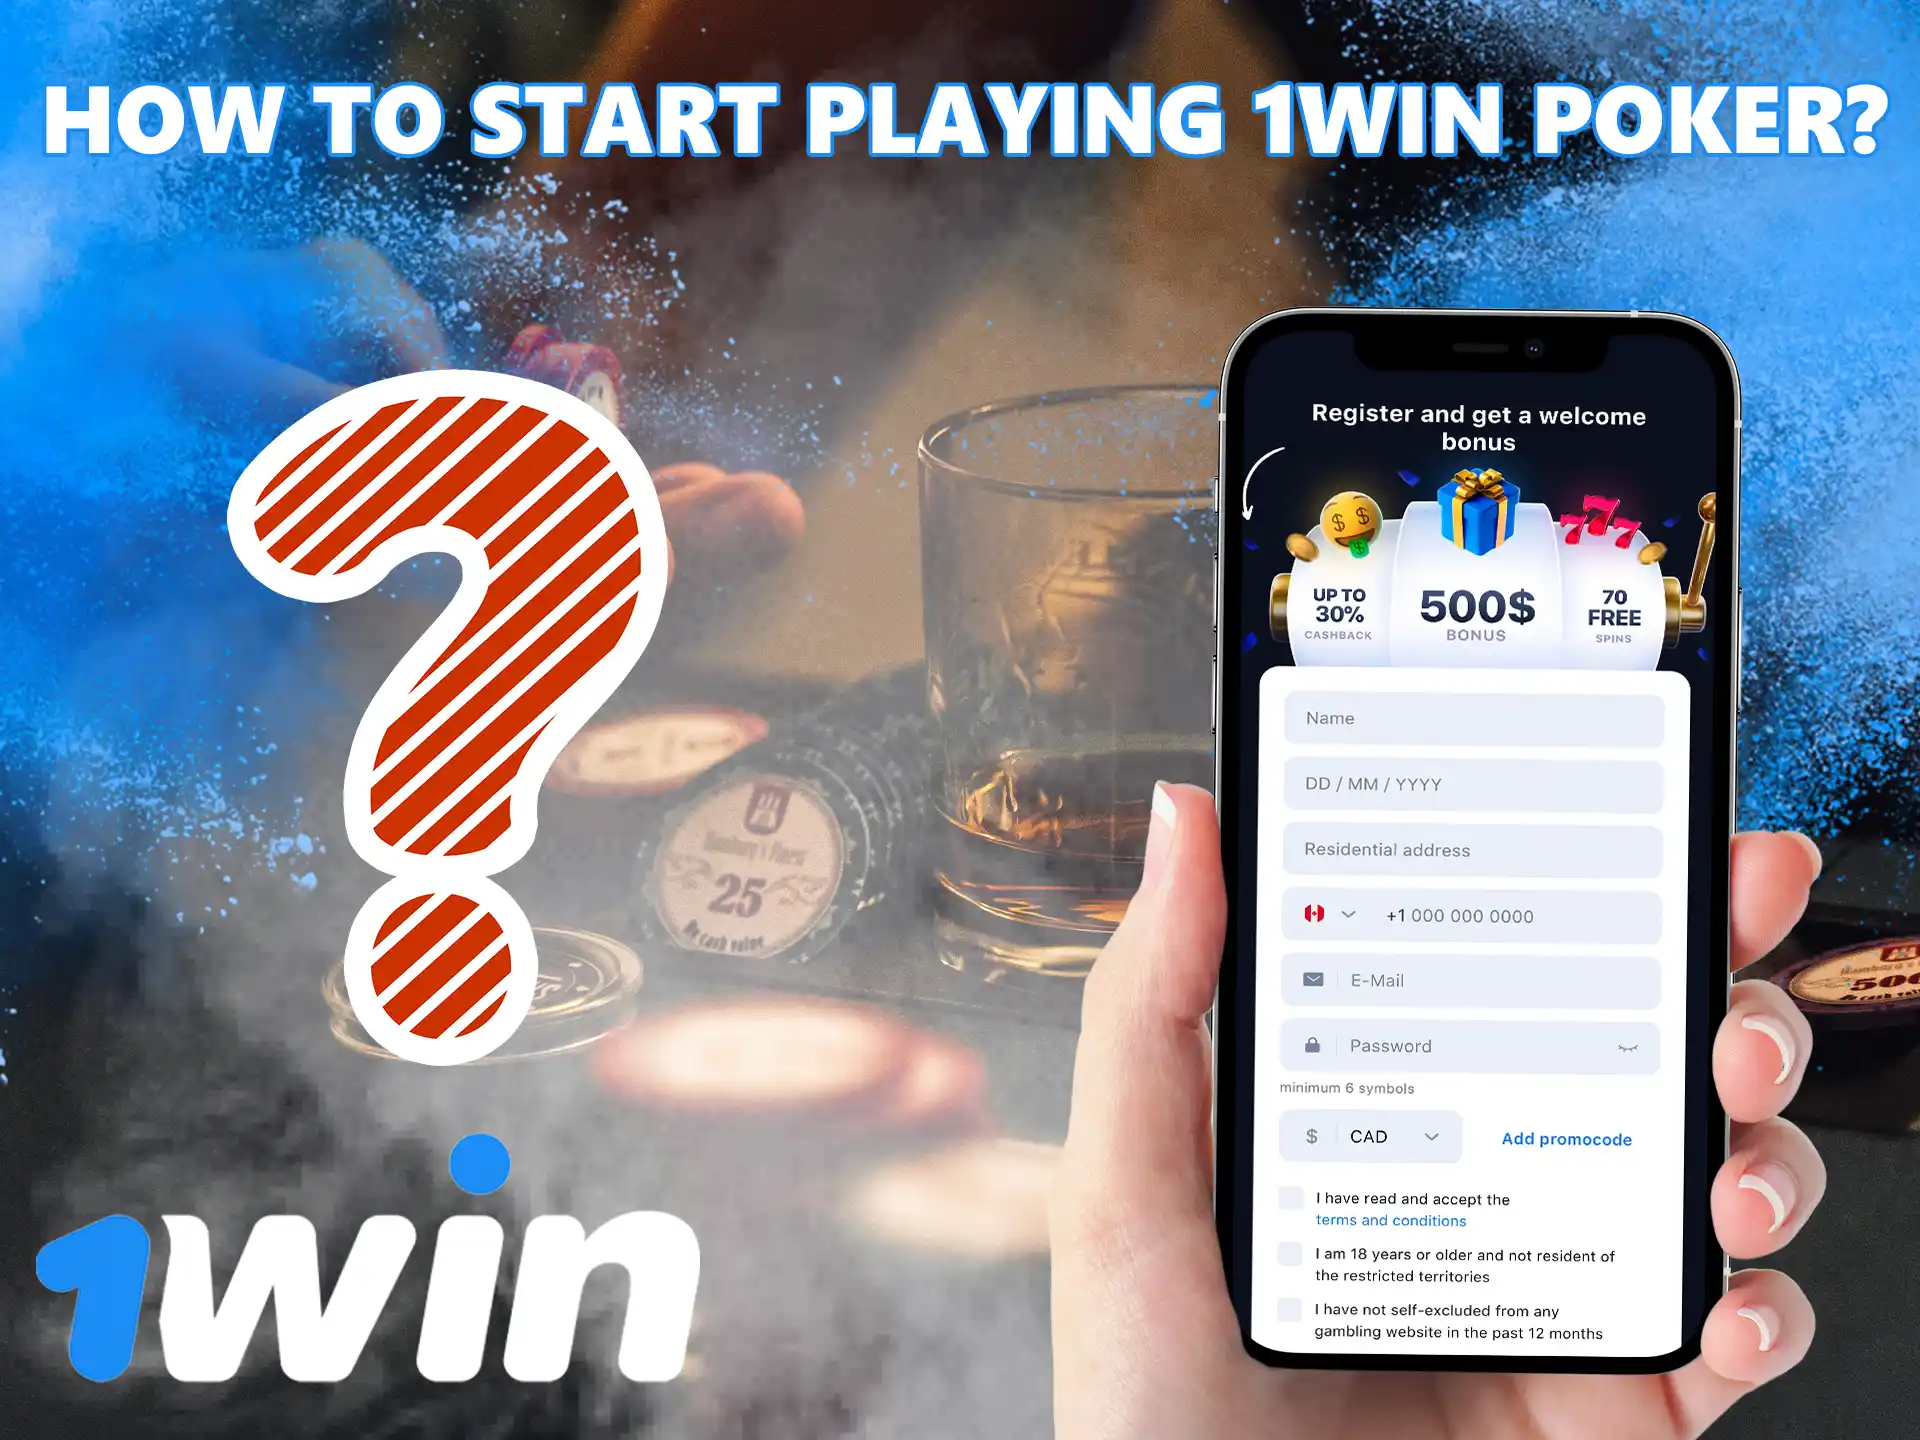 Canadian players will have a unique opportunity to play online poker directly from their smartphone in the 1Win app.